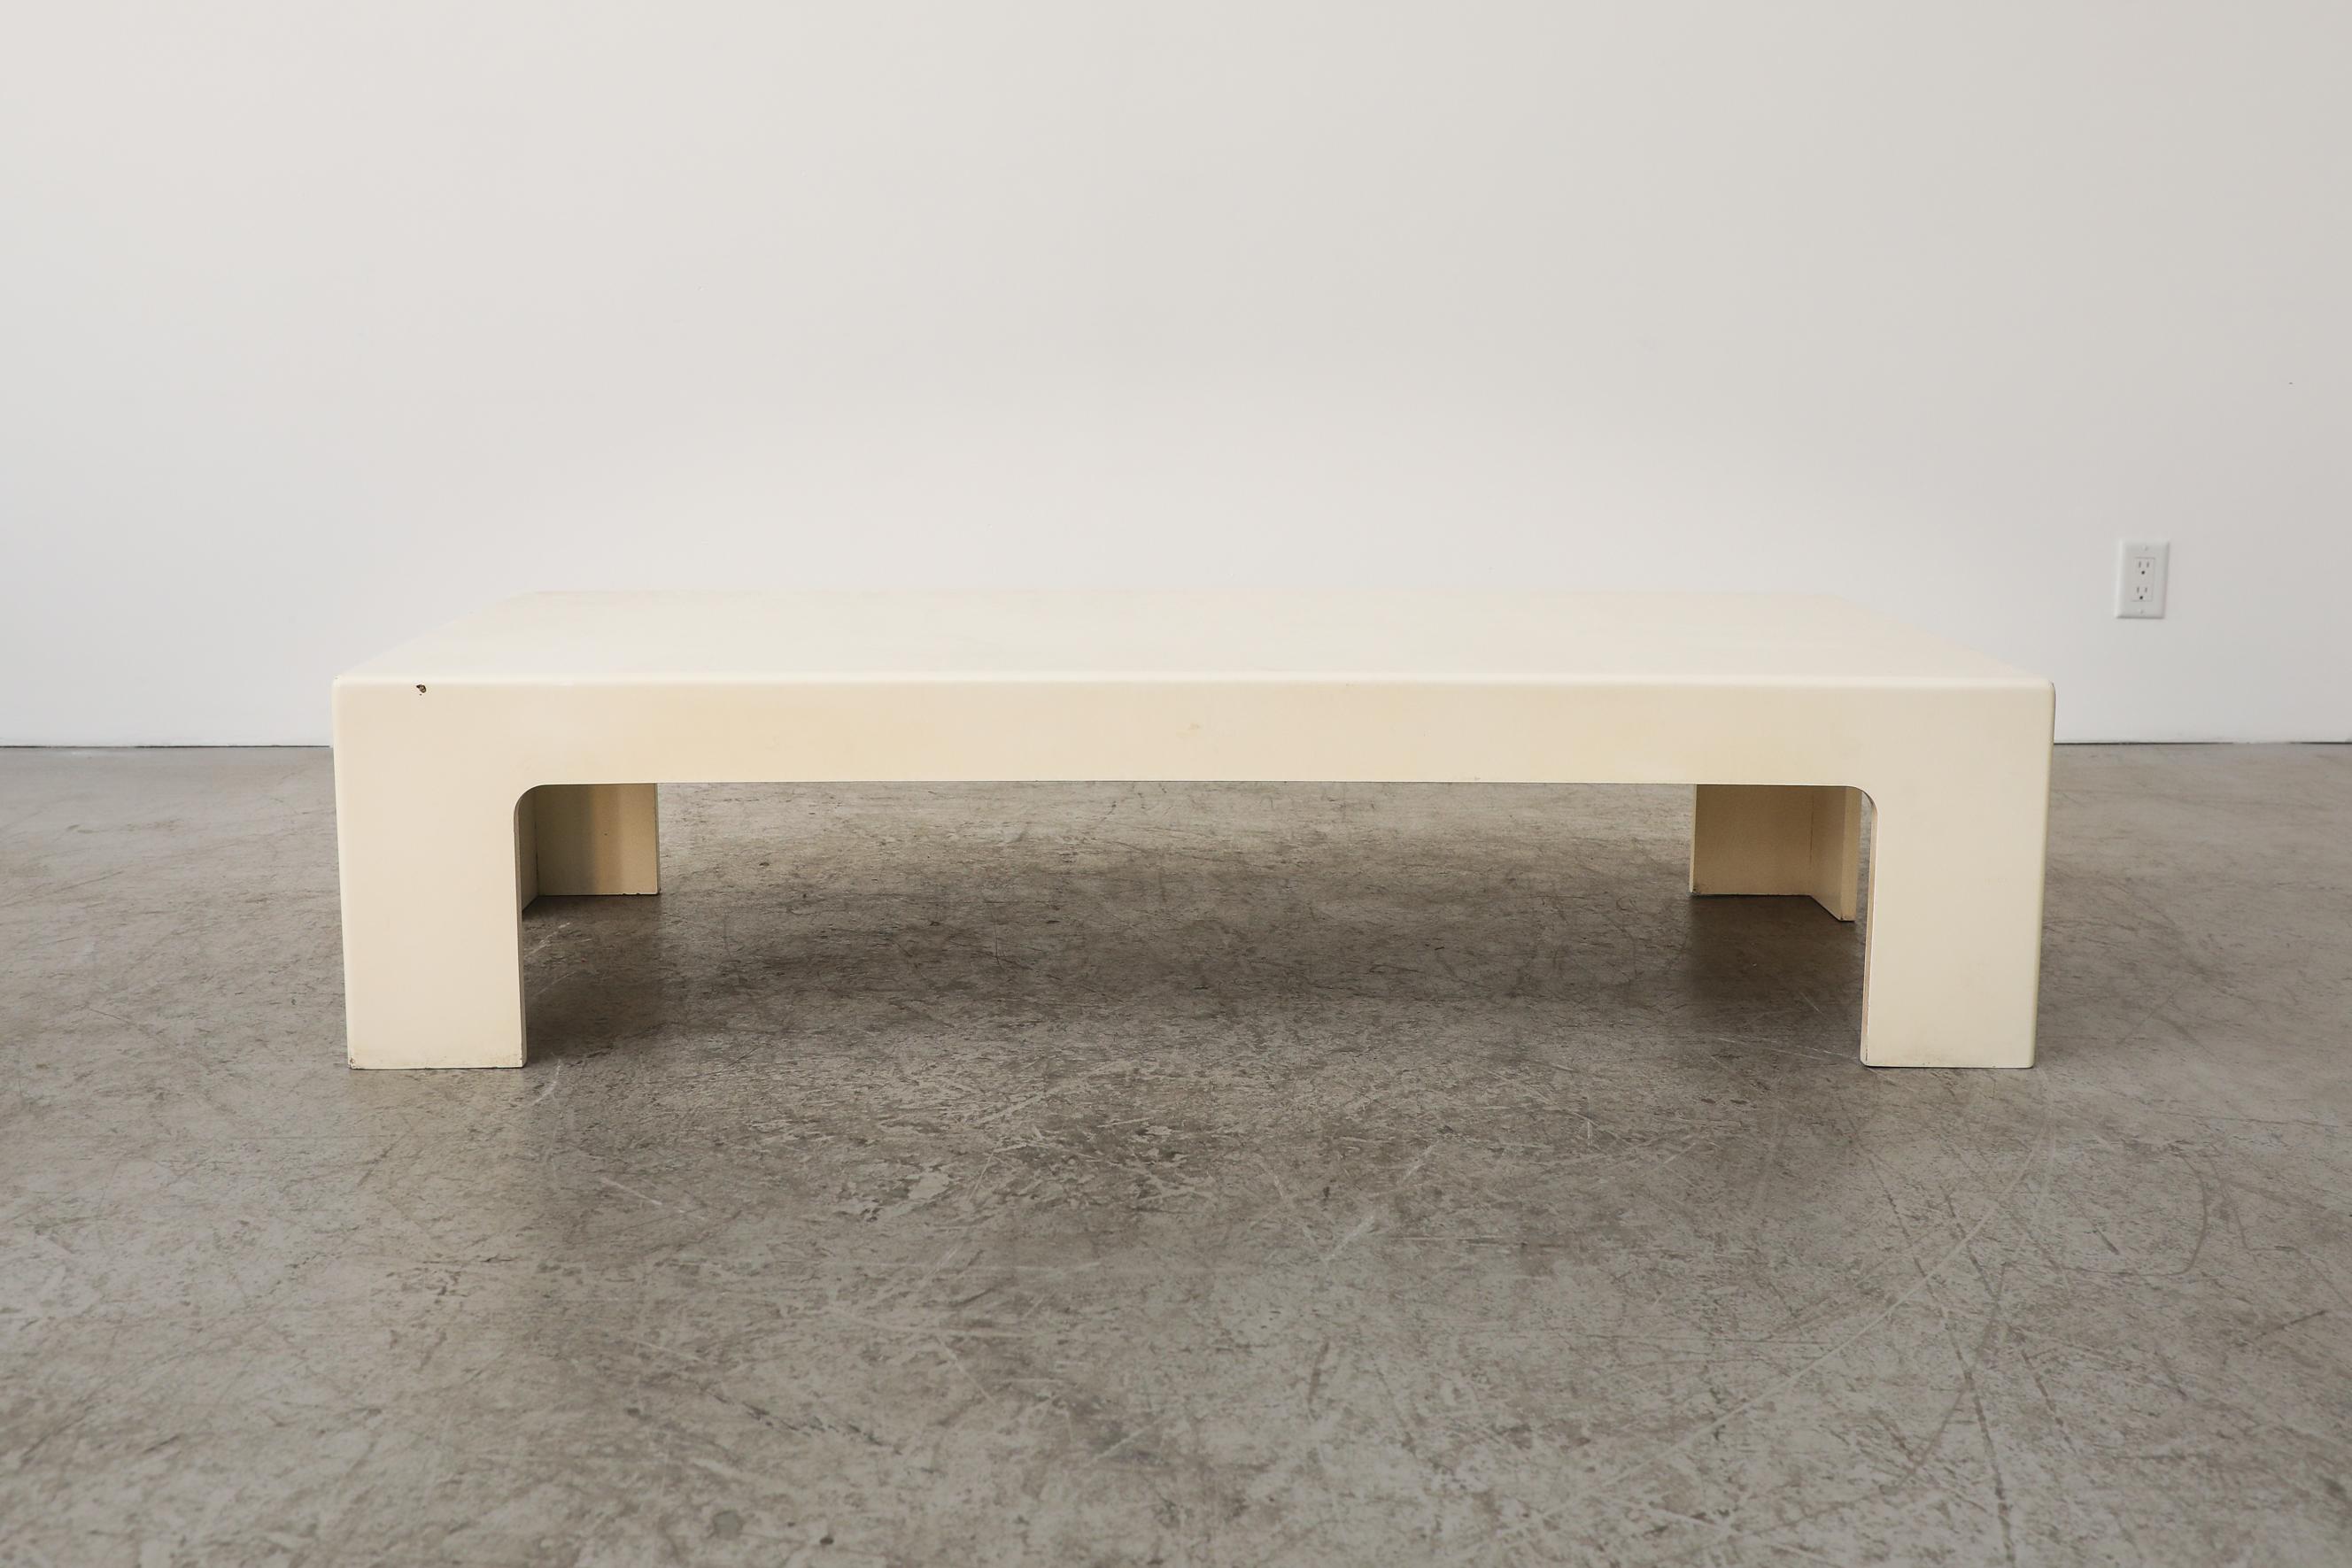 Jean Maneval Style MOD rectangle coffee table. Large bone white low and stealth coffee table made of molded composite material. In original condition with visible wear. including scuffing and chipping to the lacquer. Wear is consistent with its age